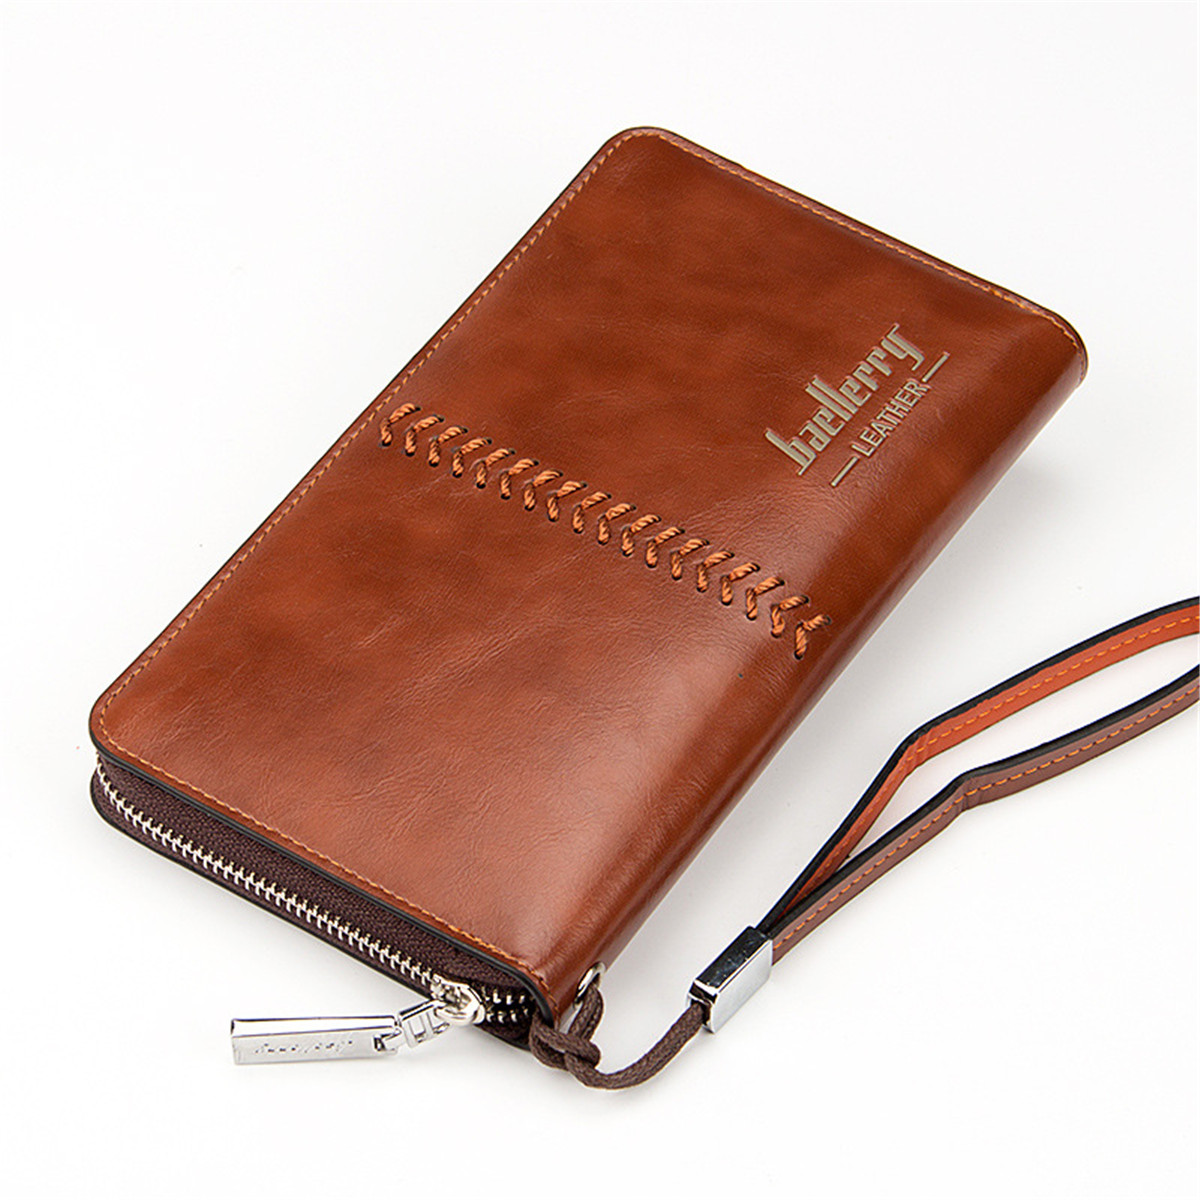 Baellerry Leather Men Zip Clutch Wallet Purse Phone Bag Credit Card Holder for under 6 inches ...